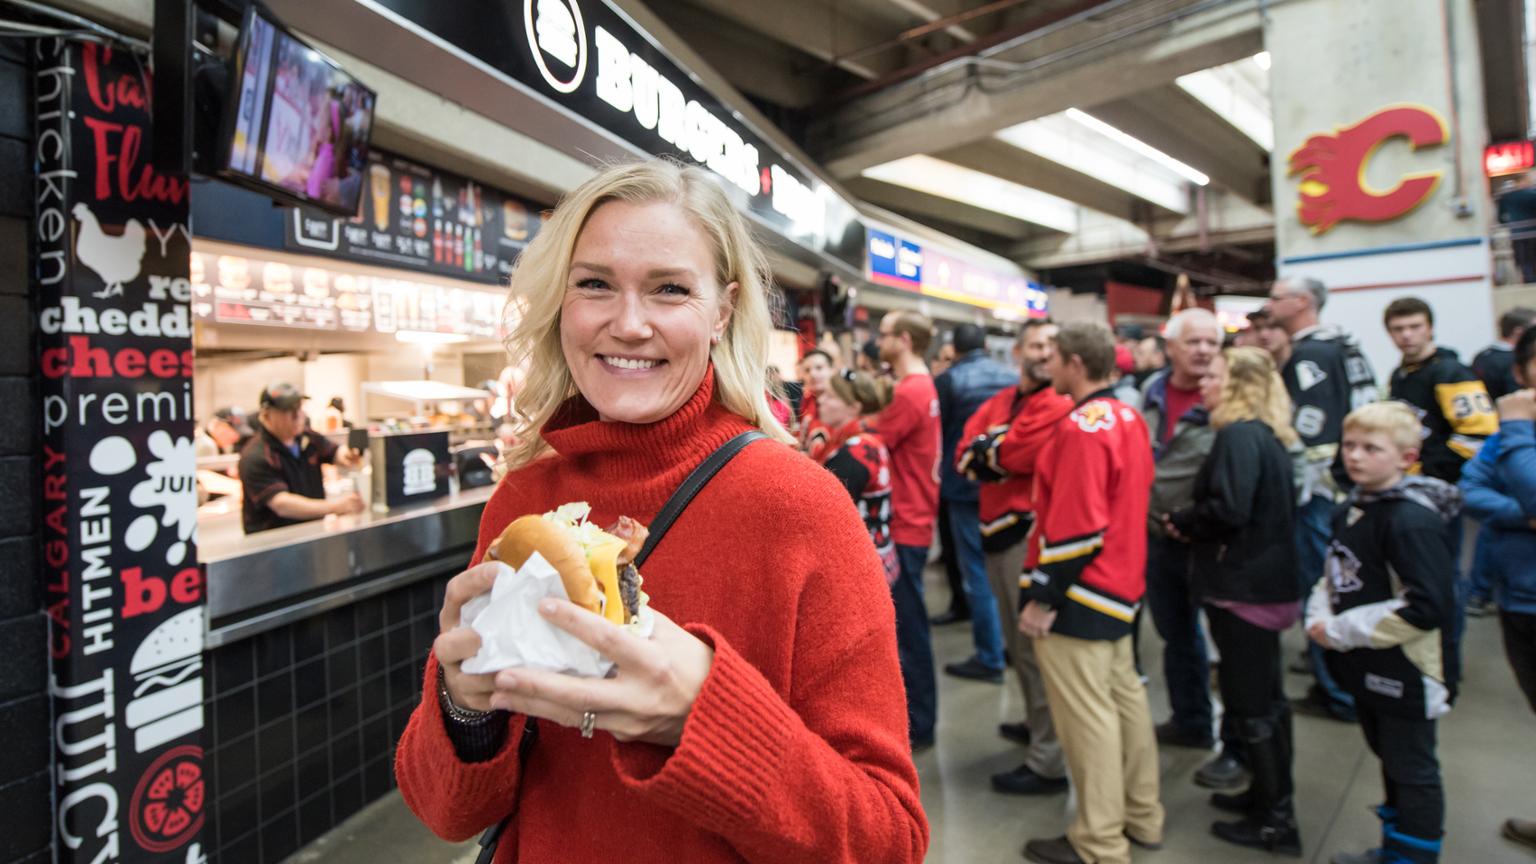 Woman holding a burger smiling, people lining up for food in the background